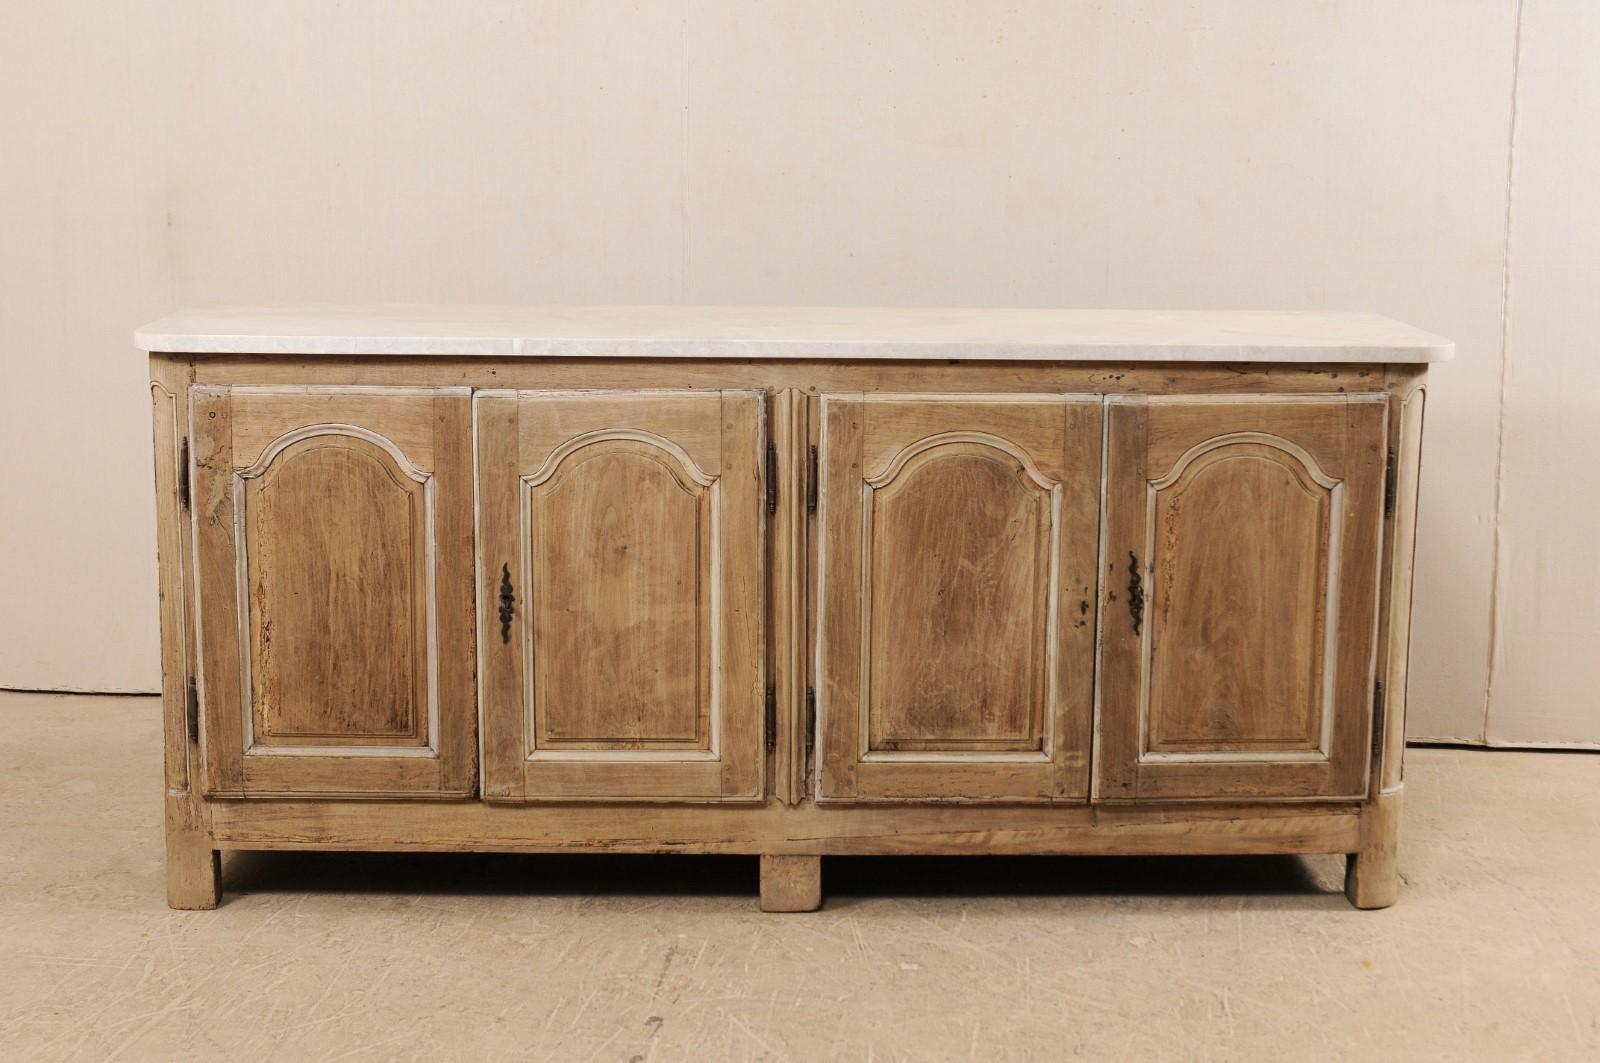 An 18th century French marble-top buffet cabinet. This antique cabinet from France, which is approximately 7.5 feet in length, features a newer addition of a honed marble top which rests above two pair of arched panel doors, carved and rounded front